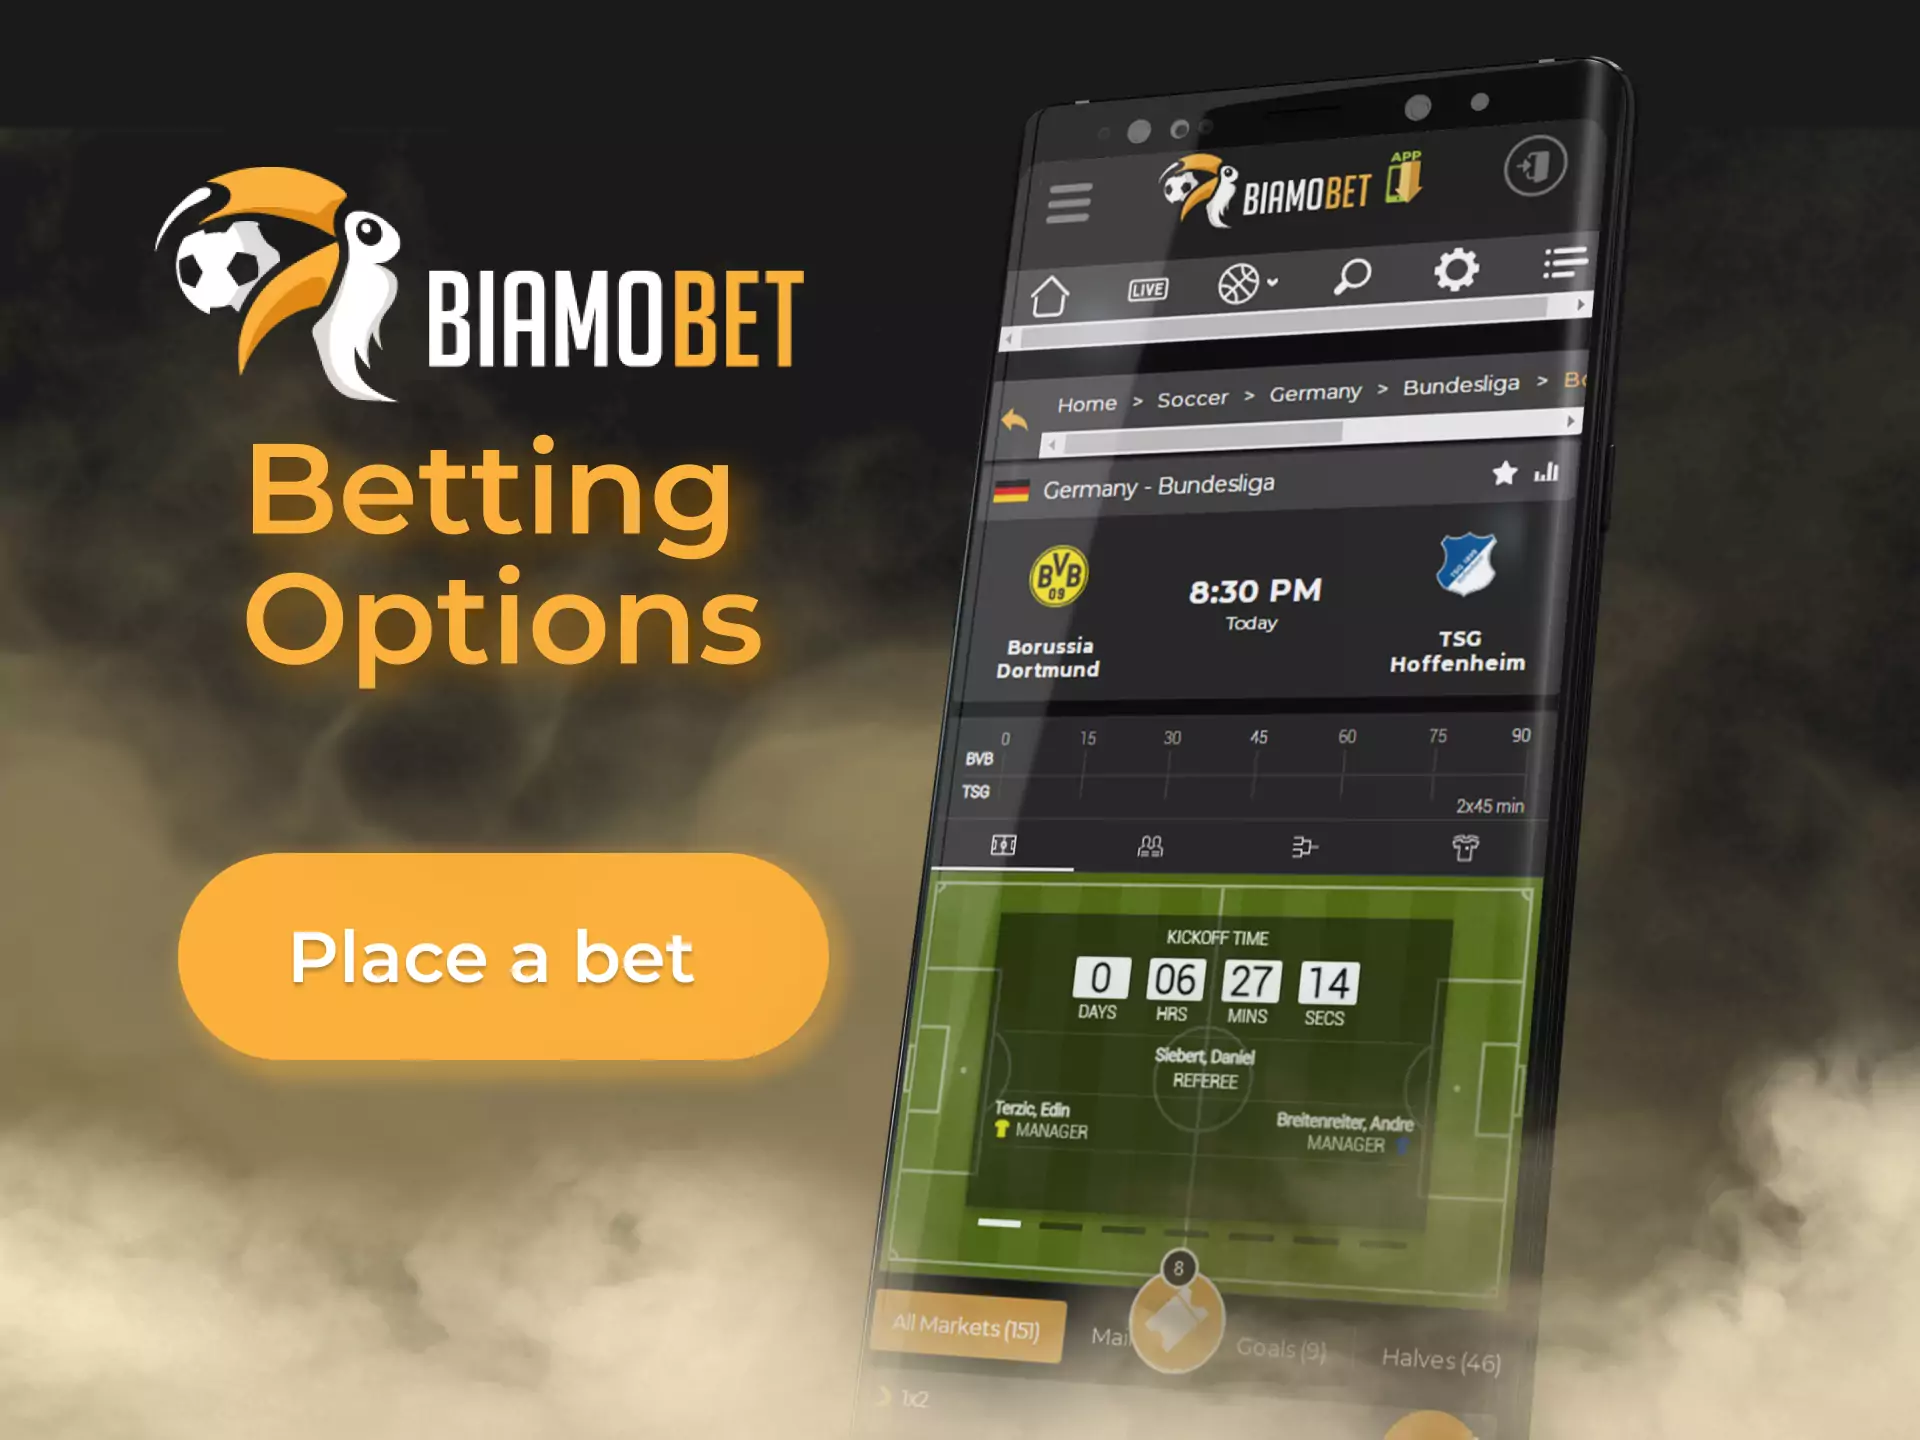 During placing a bet in the Biamobet app, you can combine different betting options.